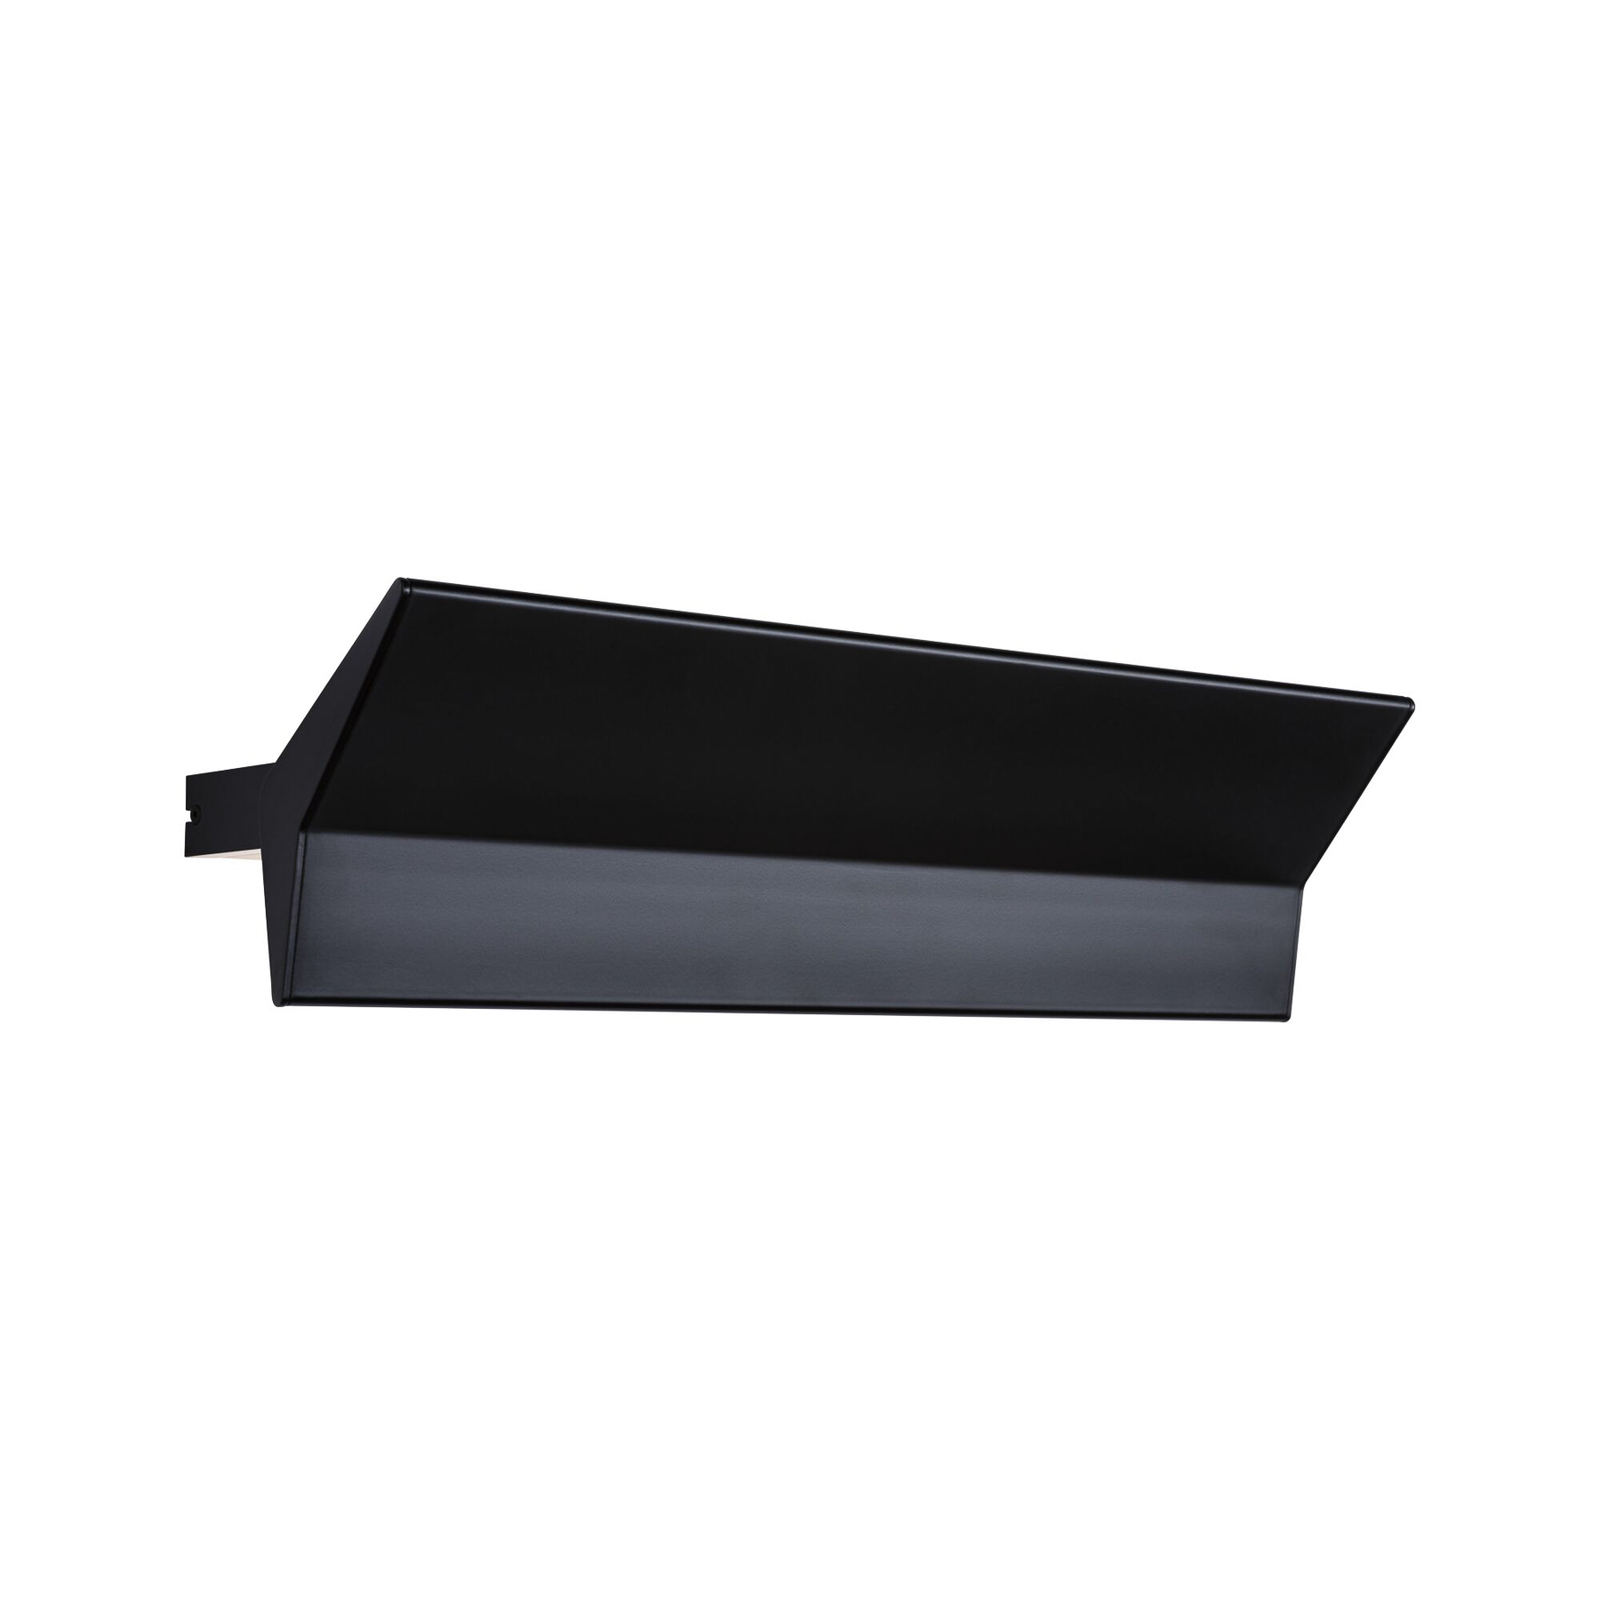 Paulmann Stine LED wall uplighter 3-step dimmable, black